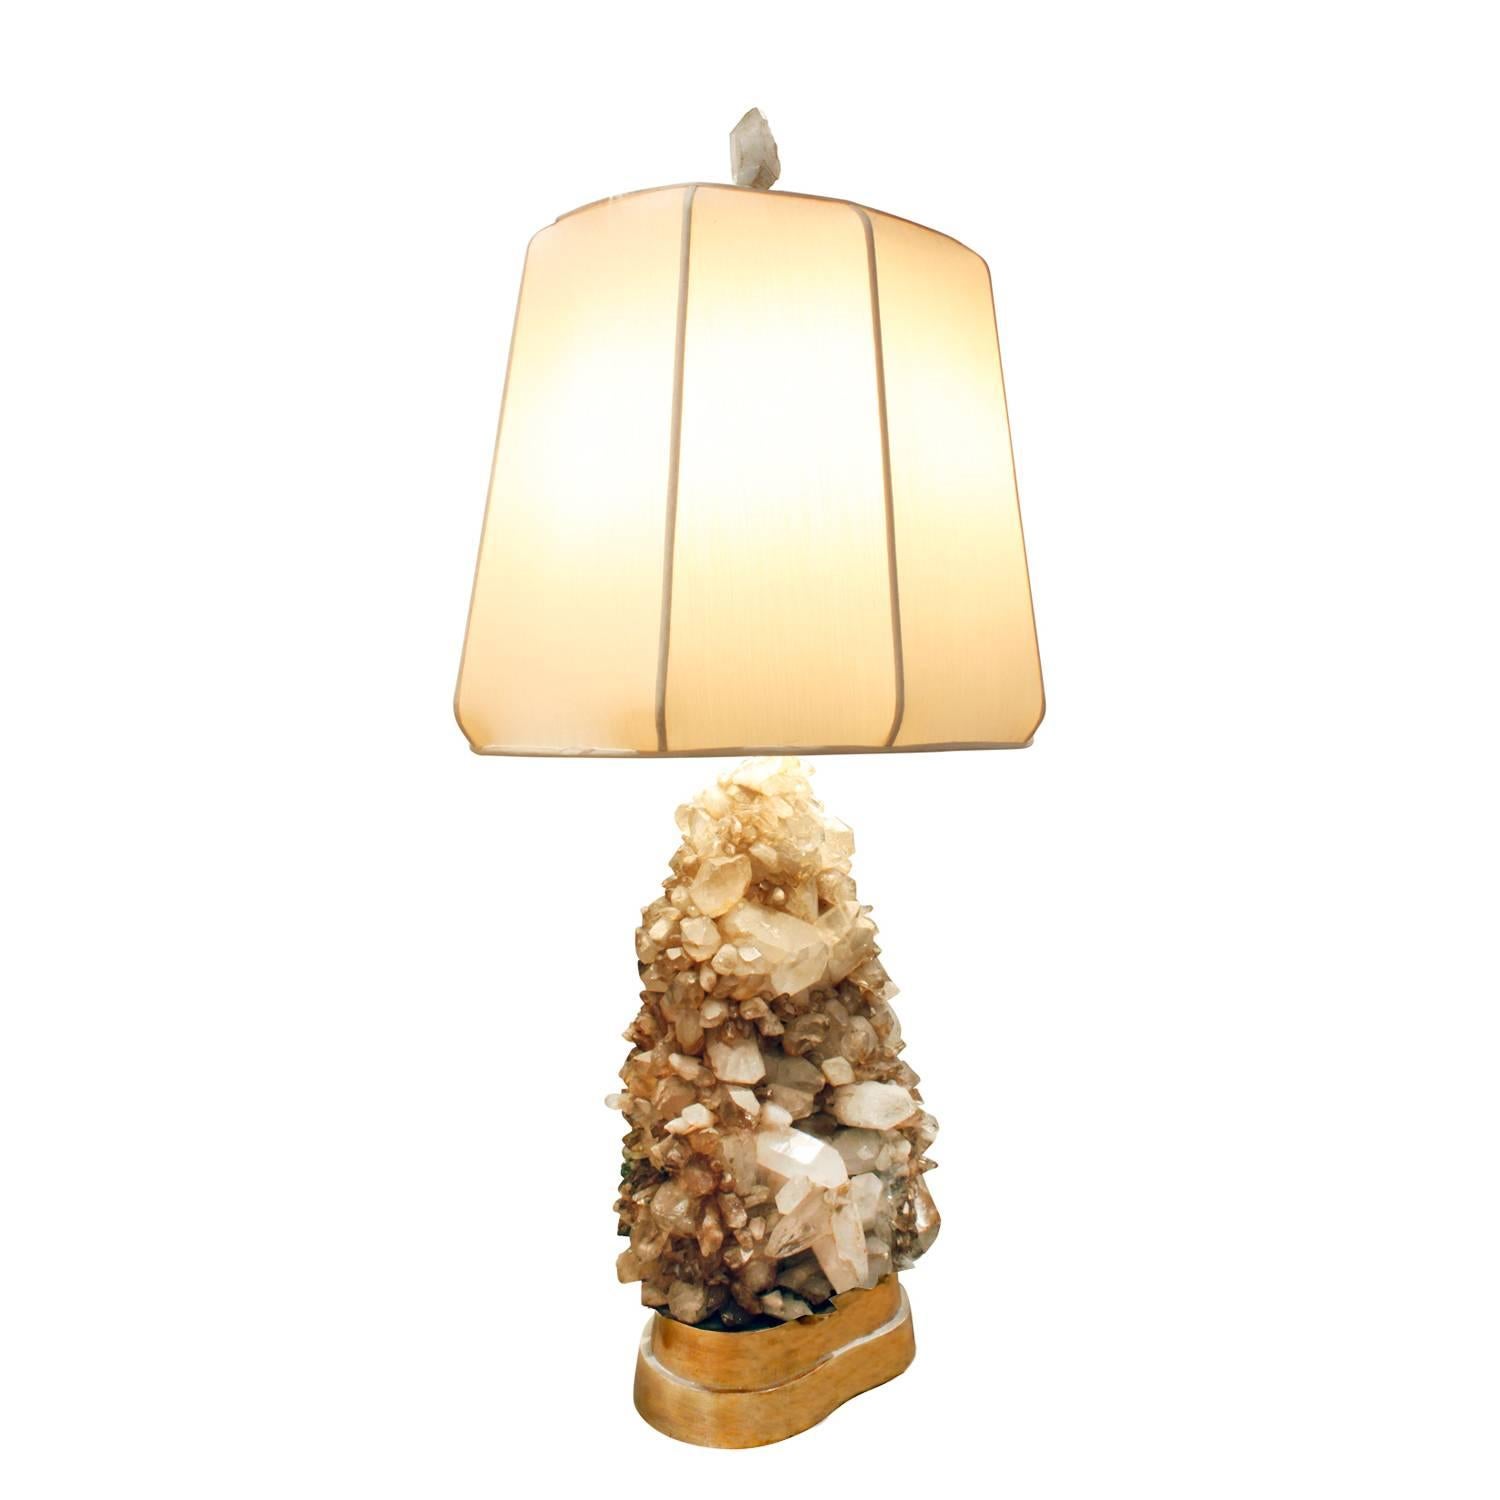 Large studio made table lamp clad in quartz crystals with gilded base and original crystal finial by Carole Stupell, American, 1950s.